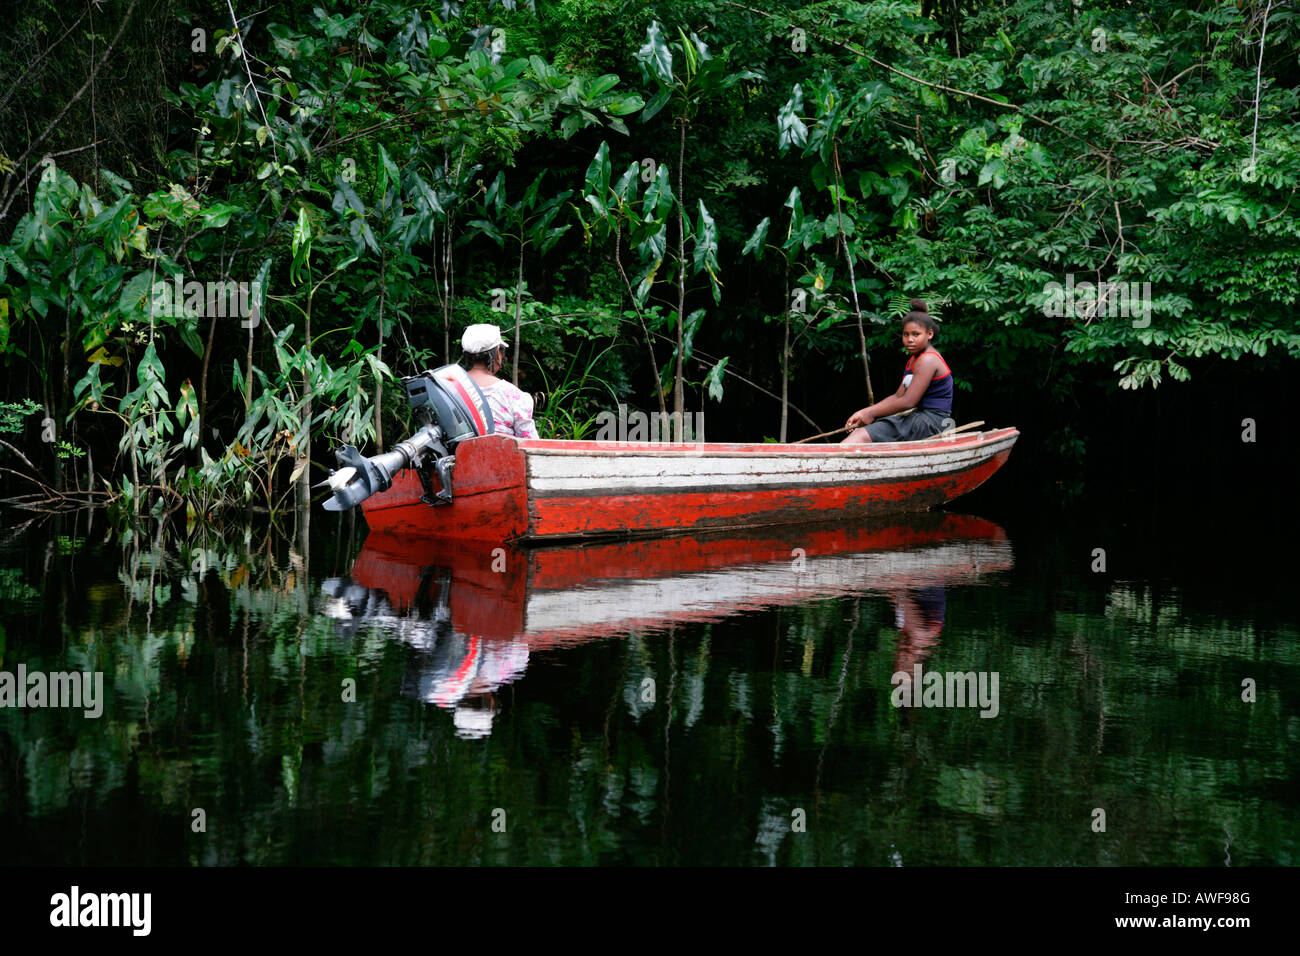 A boat as a means of transport on the Kamuni river, rain forest of Guayana, South America Stock Photo